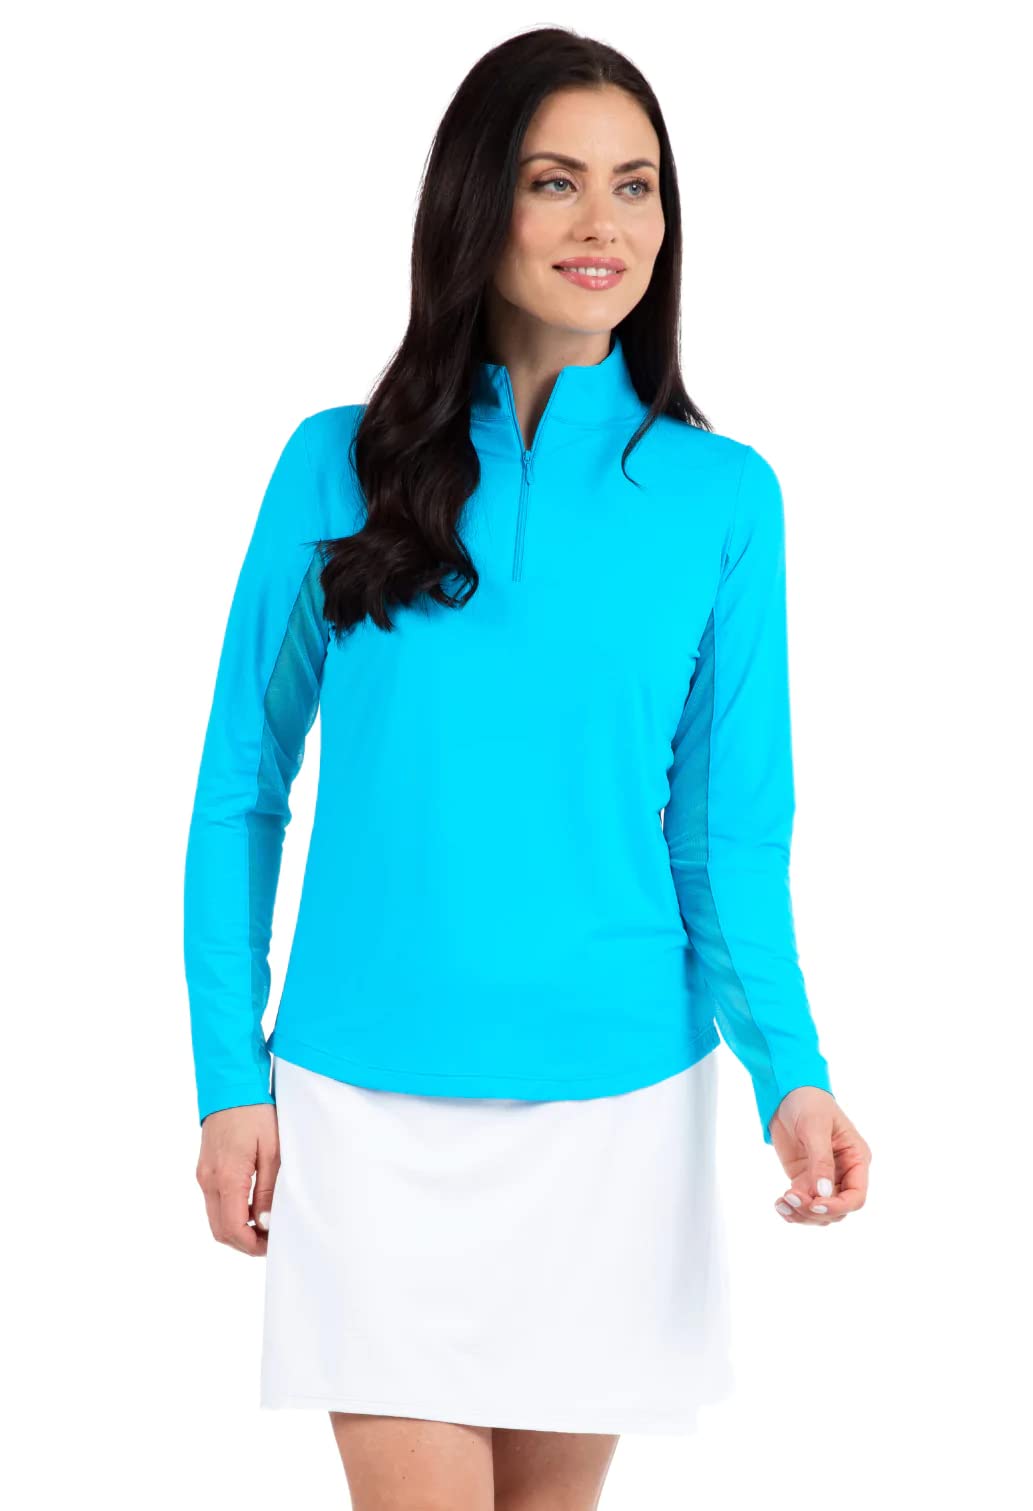 IBKUL Athleisure Wear Sun Protective UPF 50+ Icefil Cooling Tech Long Sleeve Mock Neck Top with Under Arm Mesh 80000 Turquoise Solid L